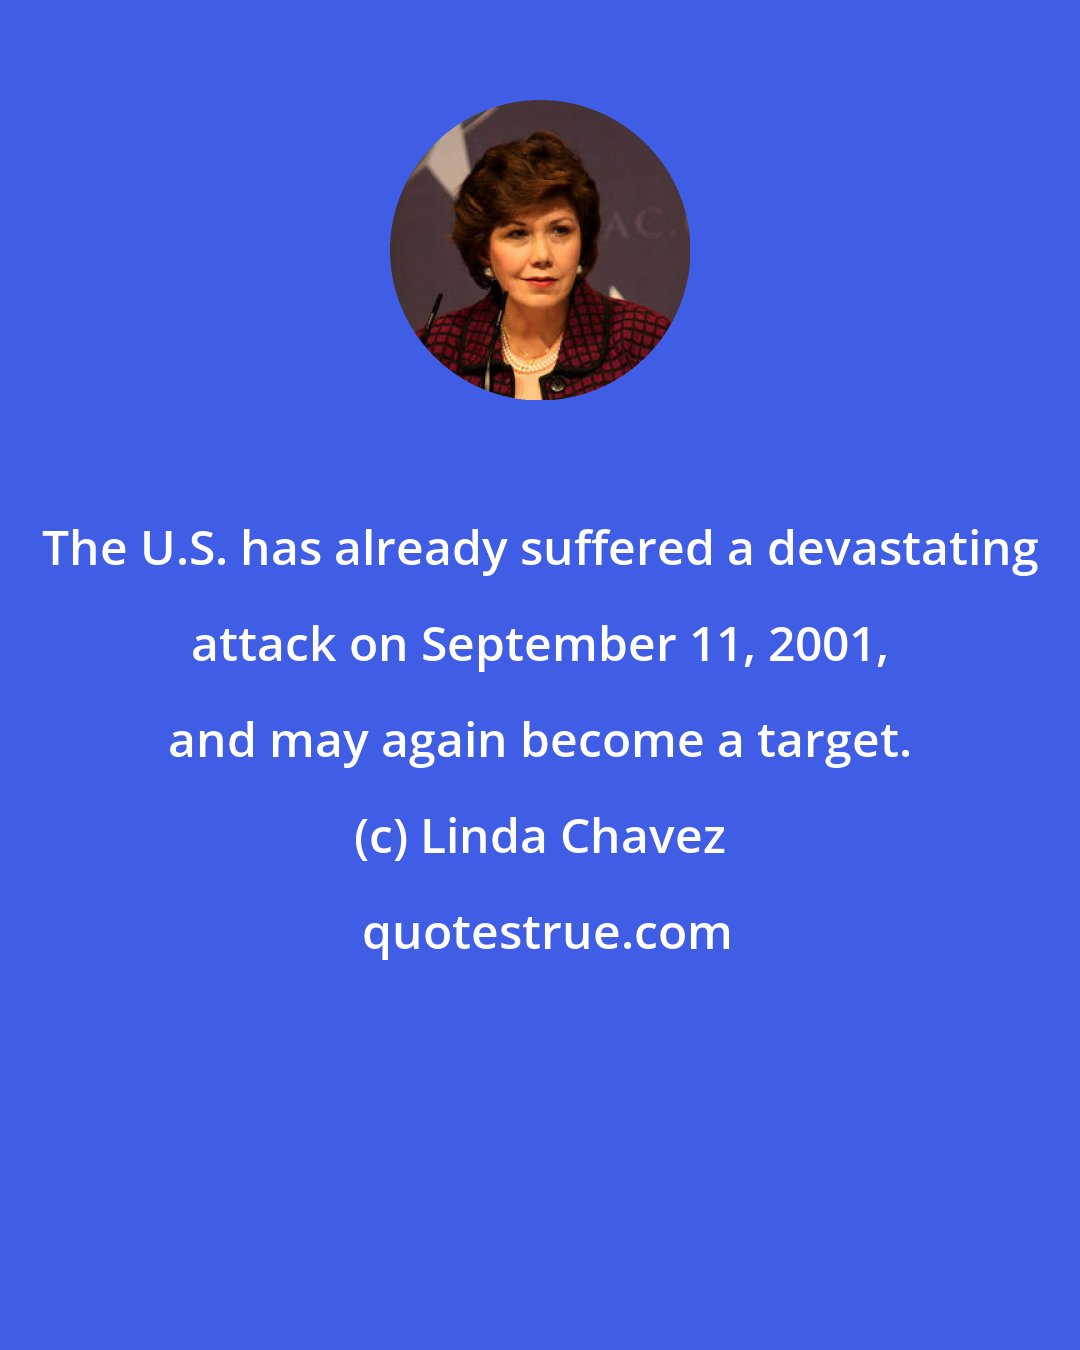 Linda Chavez: The U.S. has already suffered a devastating attack on September 11, 2001, and may again become a target.